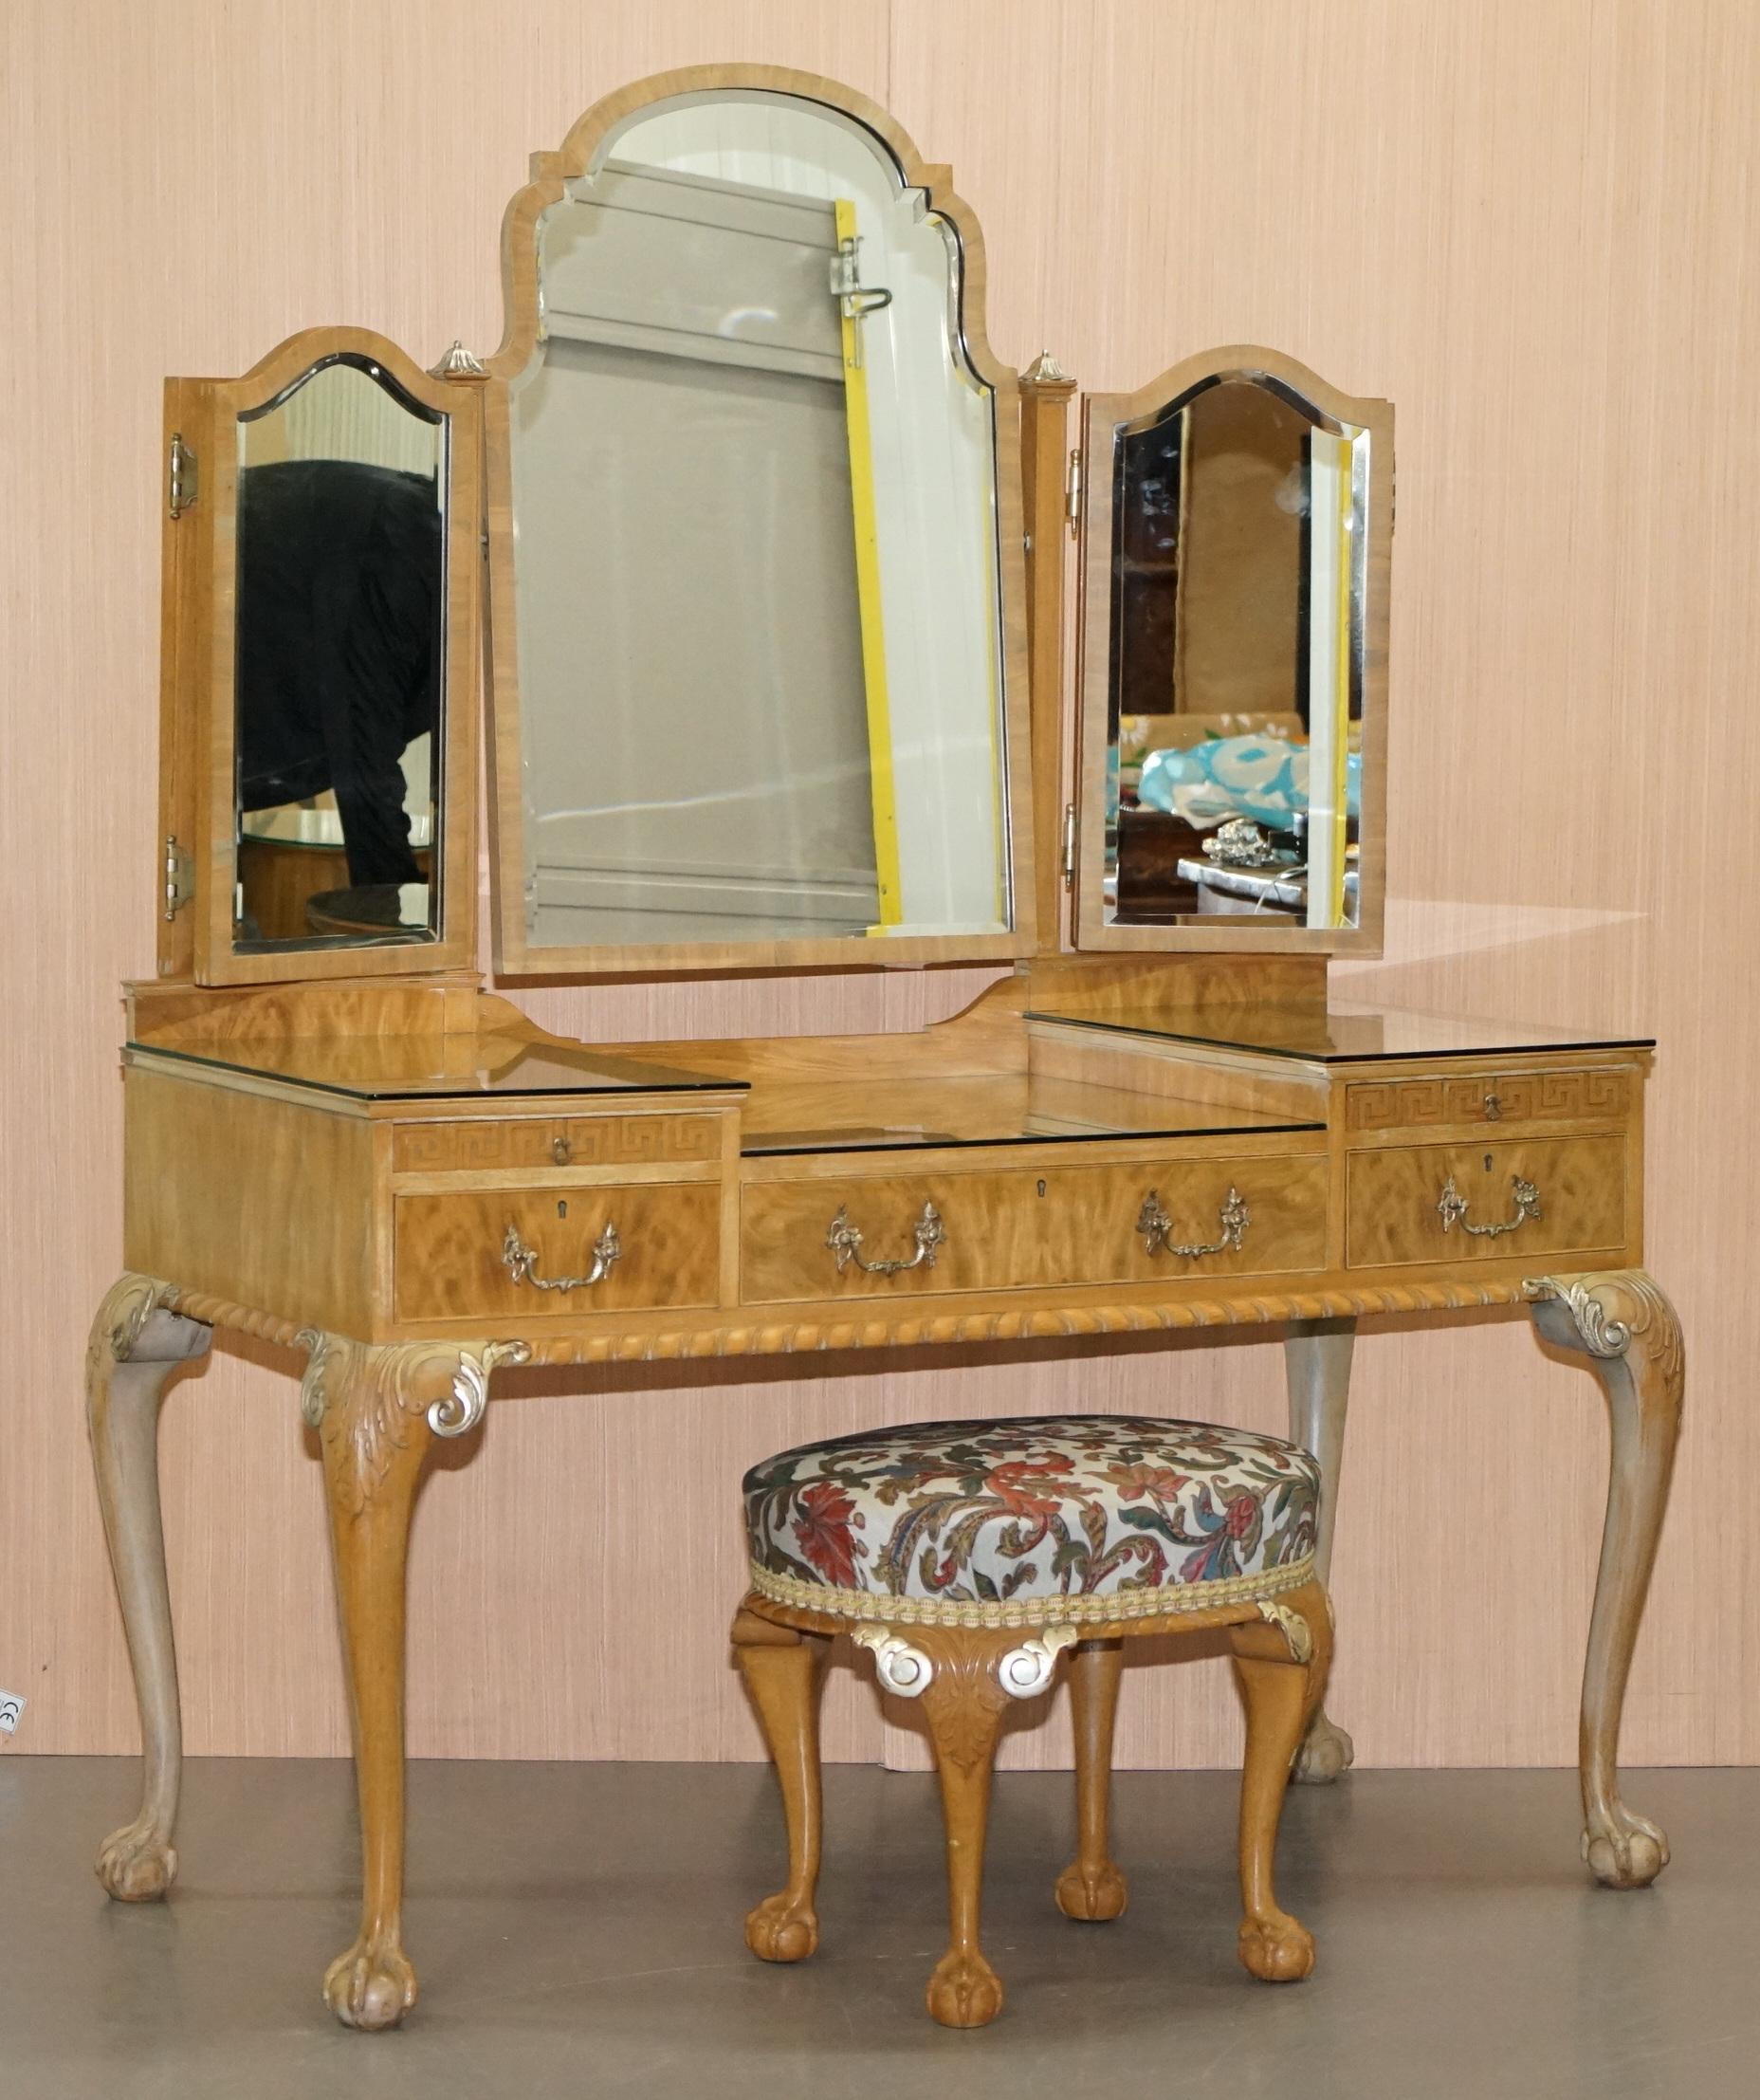 We are delighted to offer for sale this lovely Gillows Walnut Dressing table and stool with ornately carved Claw & Ball legs and folding mirrors

This dressing table has the Wearing and Gillows stamp inside the middle drawer

The table is a